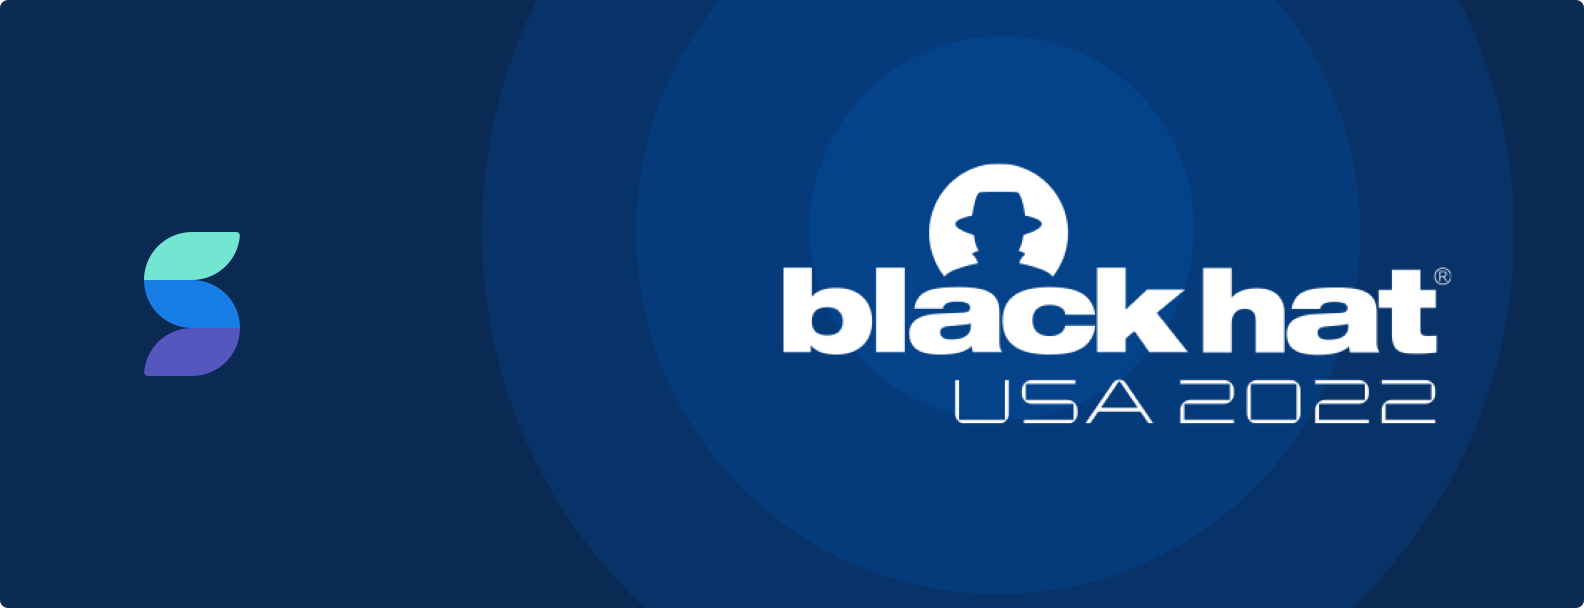 Black Hat 2022: Join Us at One of America’s Premier Cybersecurity Conferences